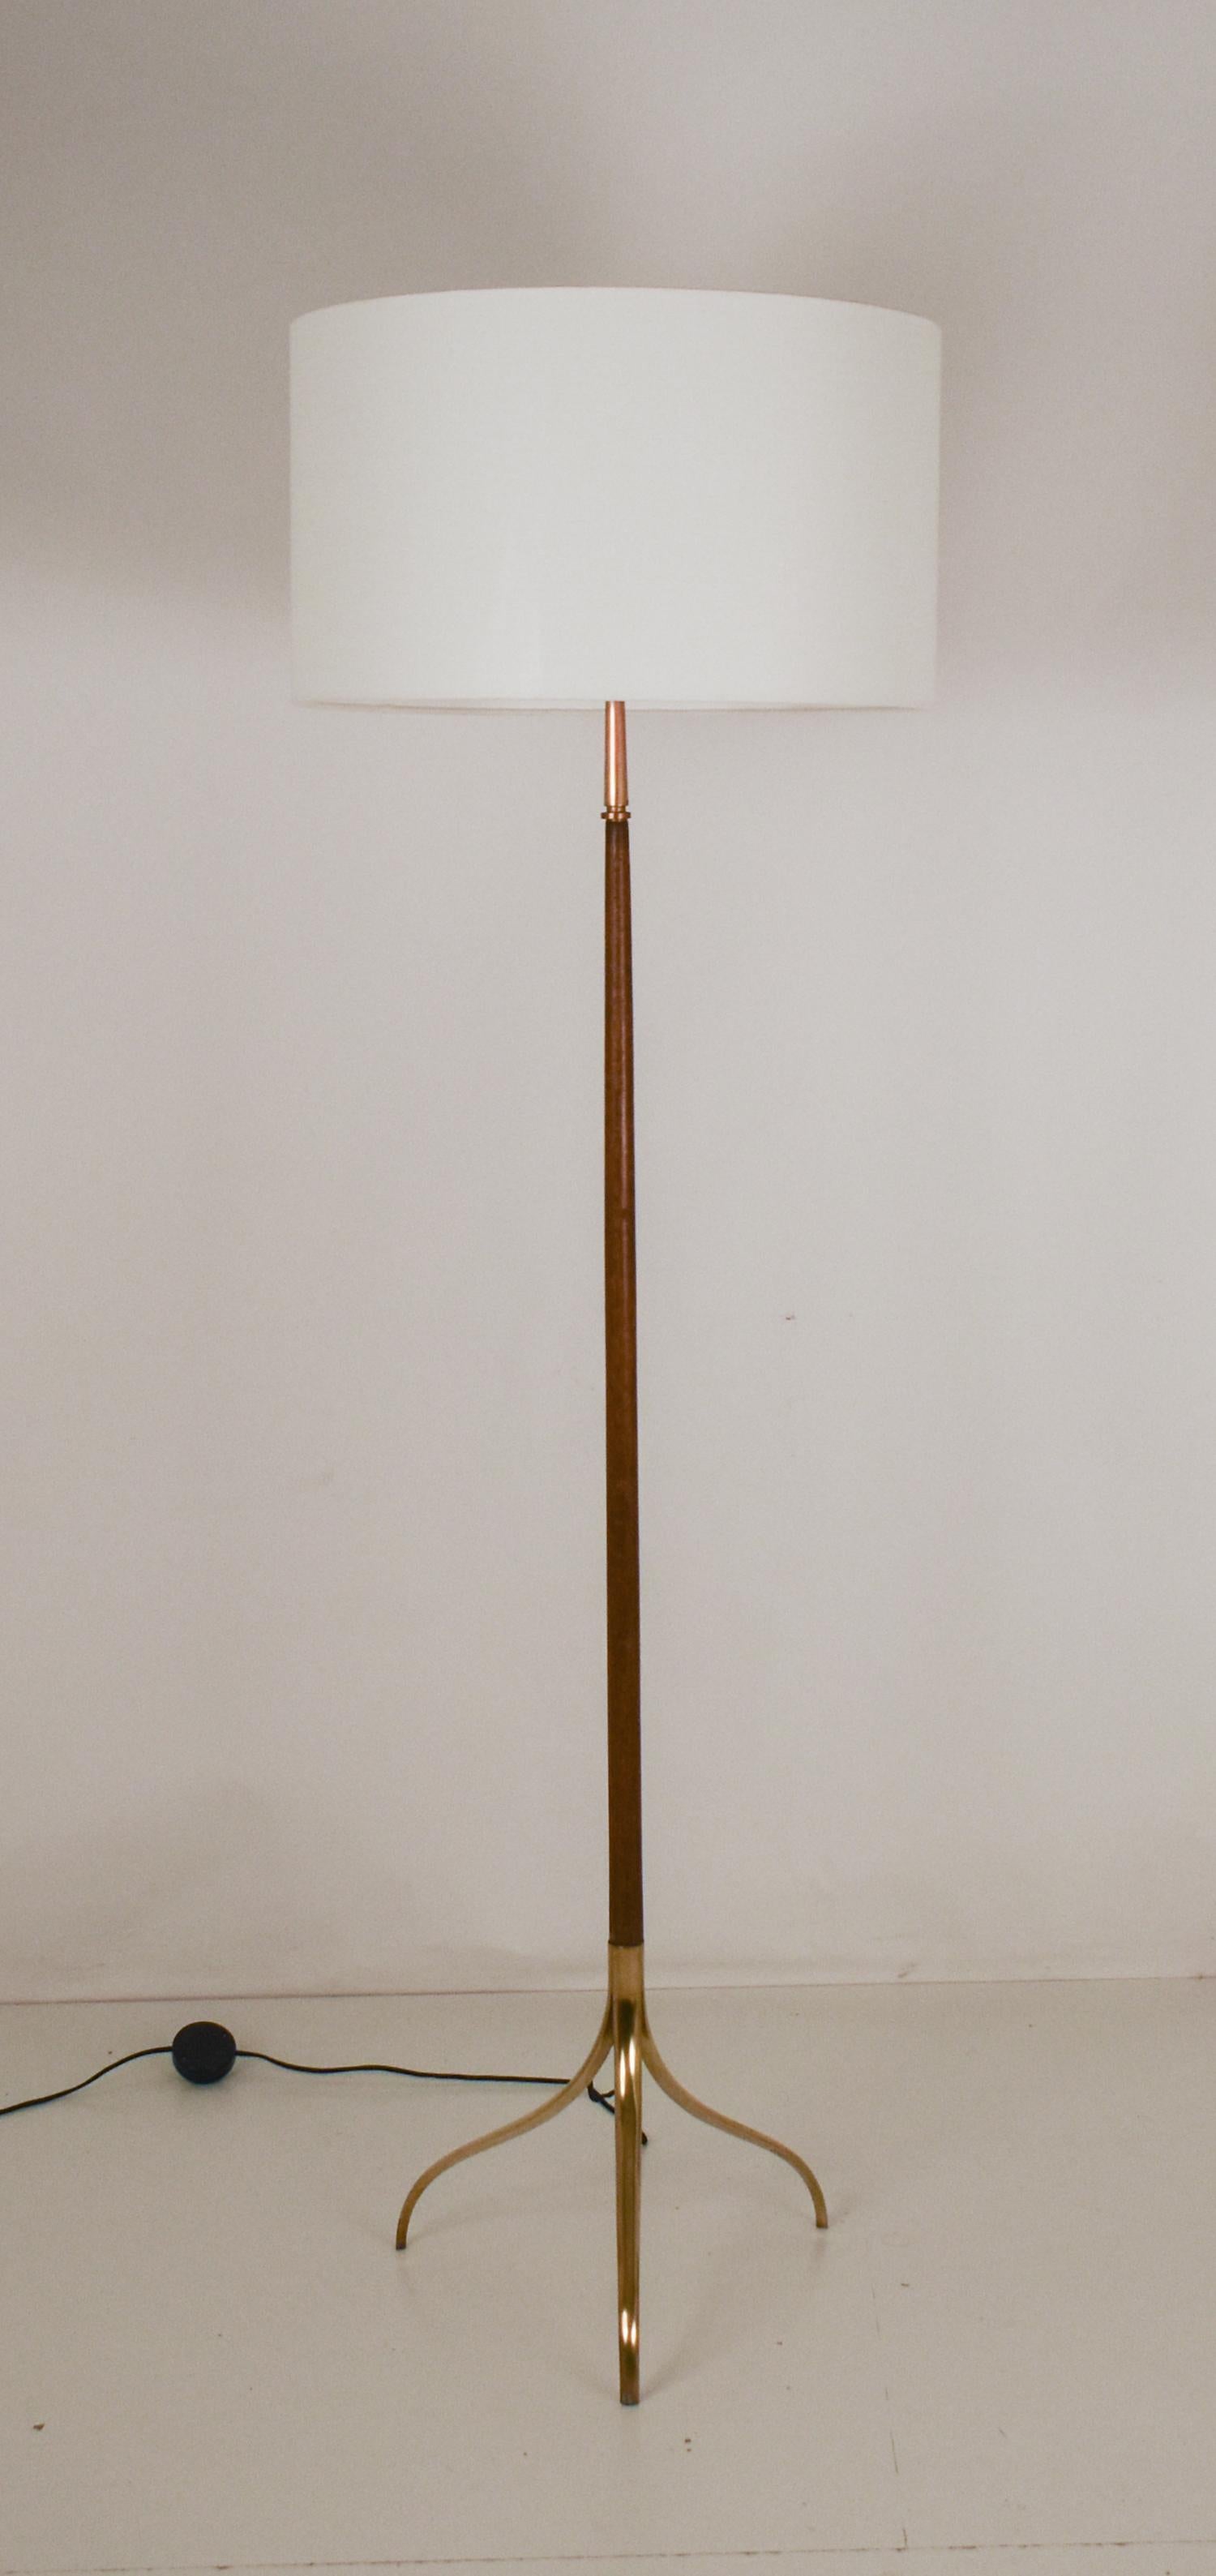 Mid-century floor lamp from the prestigious Spanish company Metalarte. Design similar to the lamp for Lumi by Oscar Torlasco. 1950's.

Brass foot and walnut body.
It consists of three E 27 lamp holders, two on the sides and one facing up.
Oscar